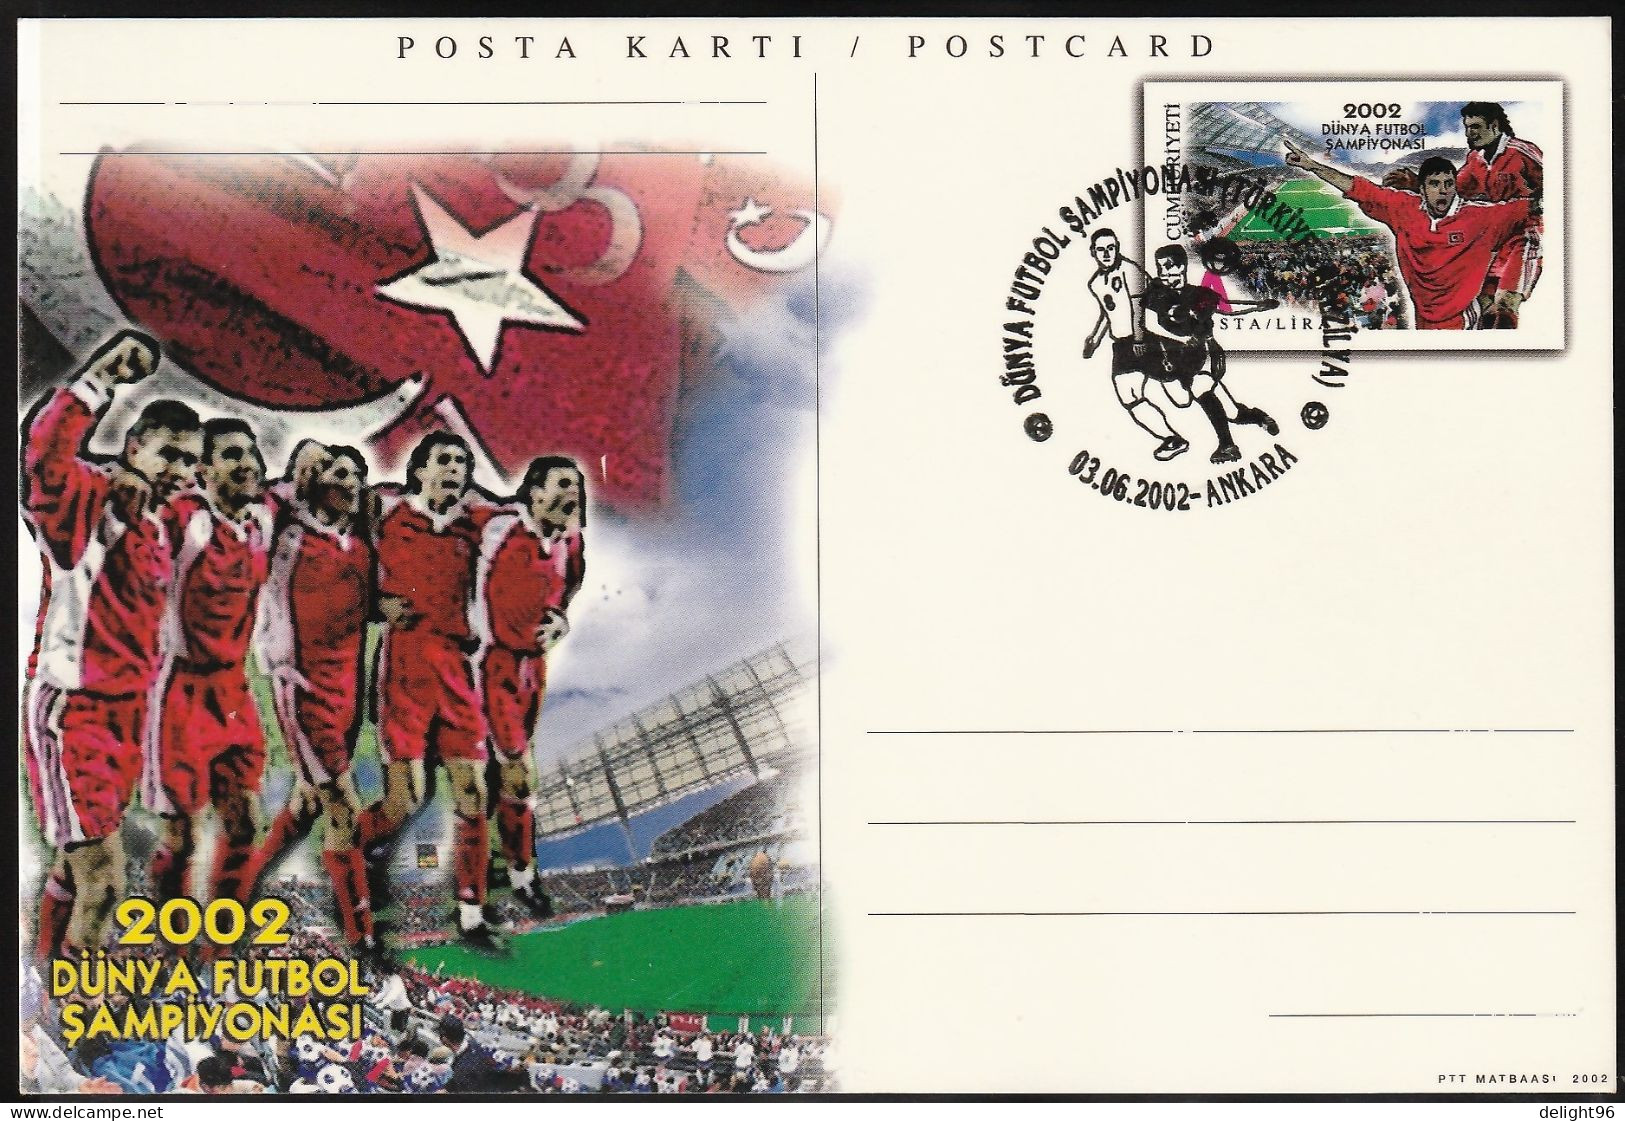 2002 Turkey Group Stage Match Vs. Brazil At FIFA World Cup In South Korea-Japan Commemorative Cancellation On PSC - 2002 – Südkorea / Japan